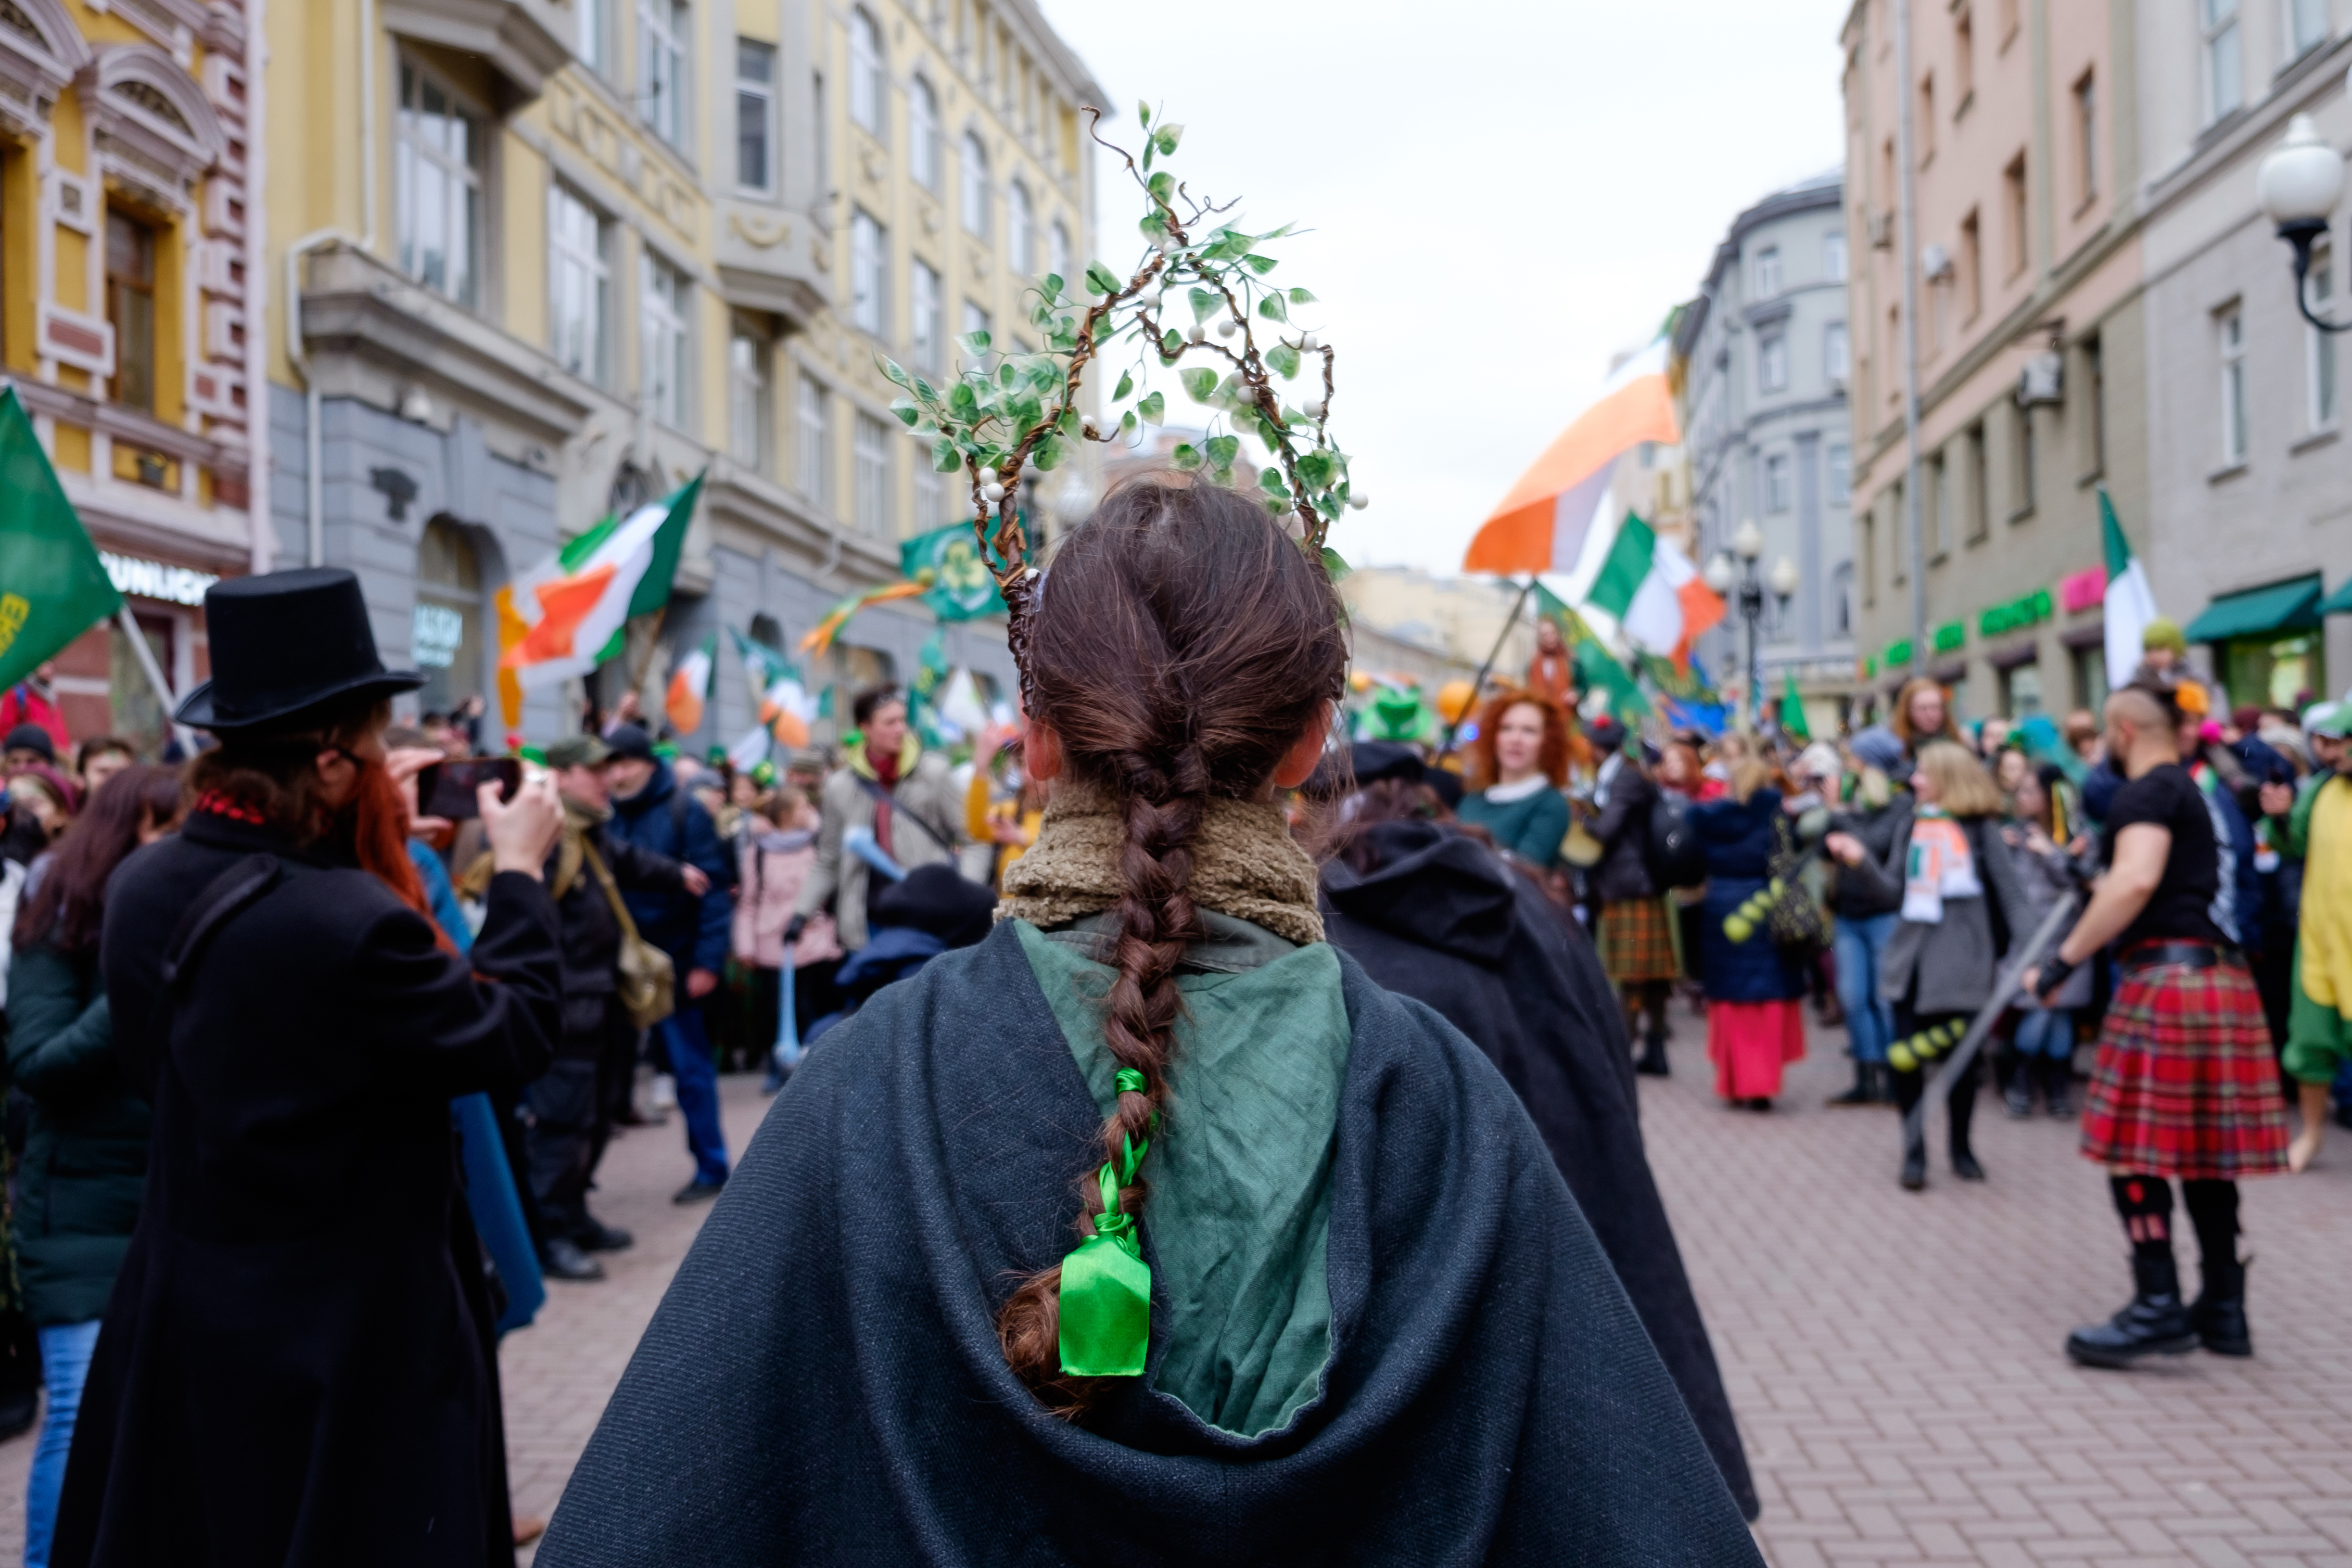 St Patrick’s Day – The Greenest Day of the Year